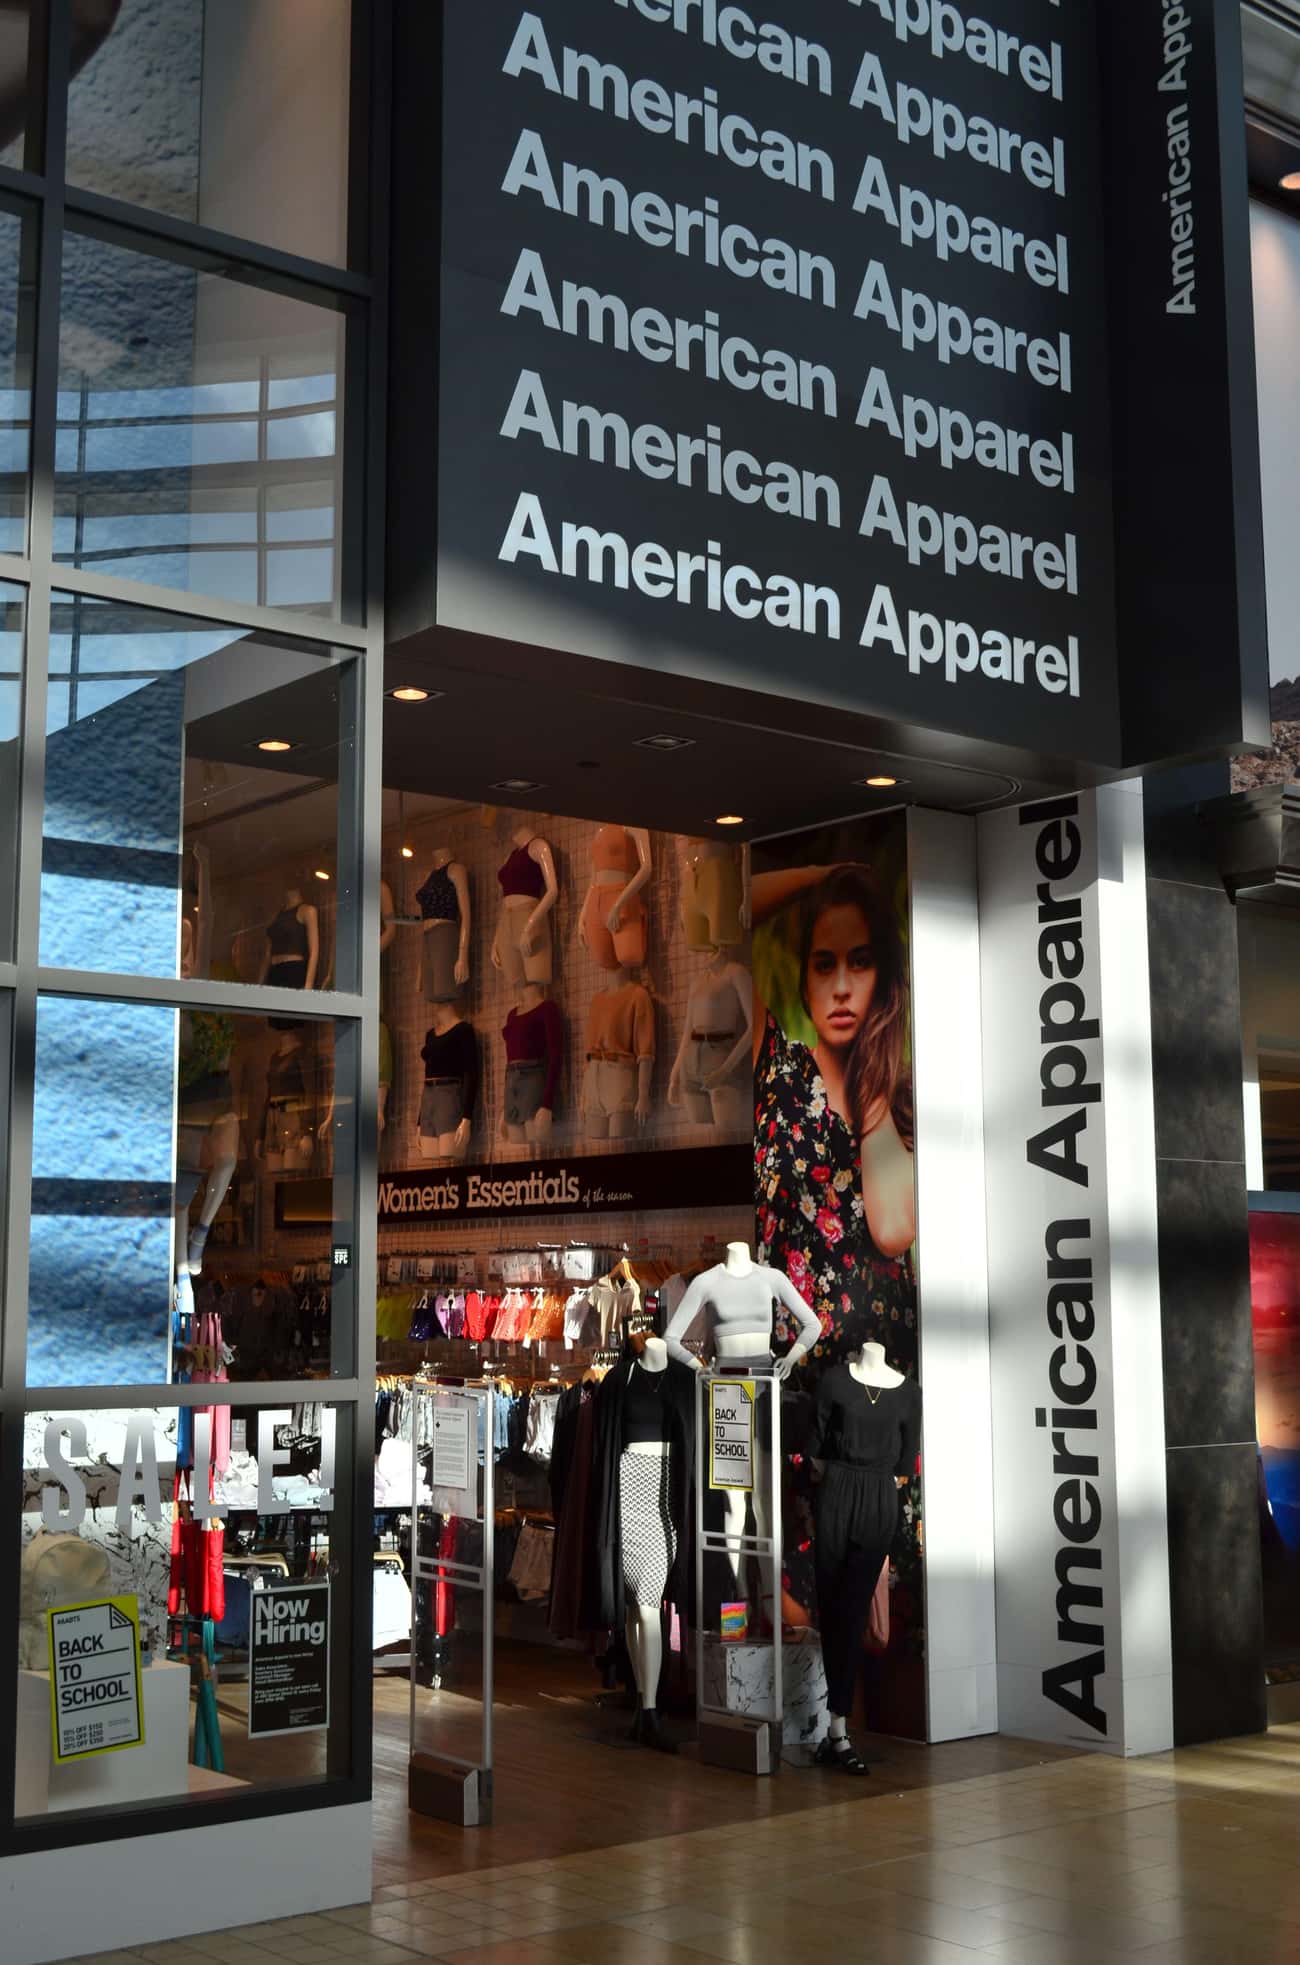 American Apparel Managers Were Required To Send In Photos Of Workers